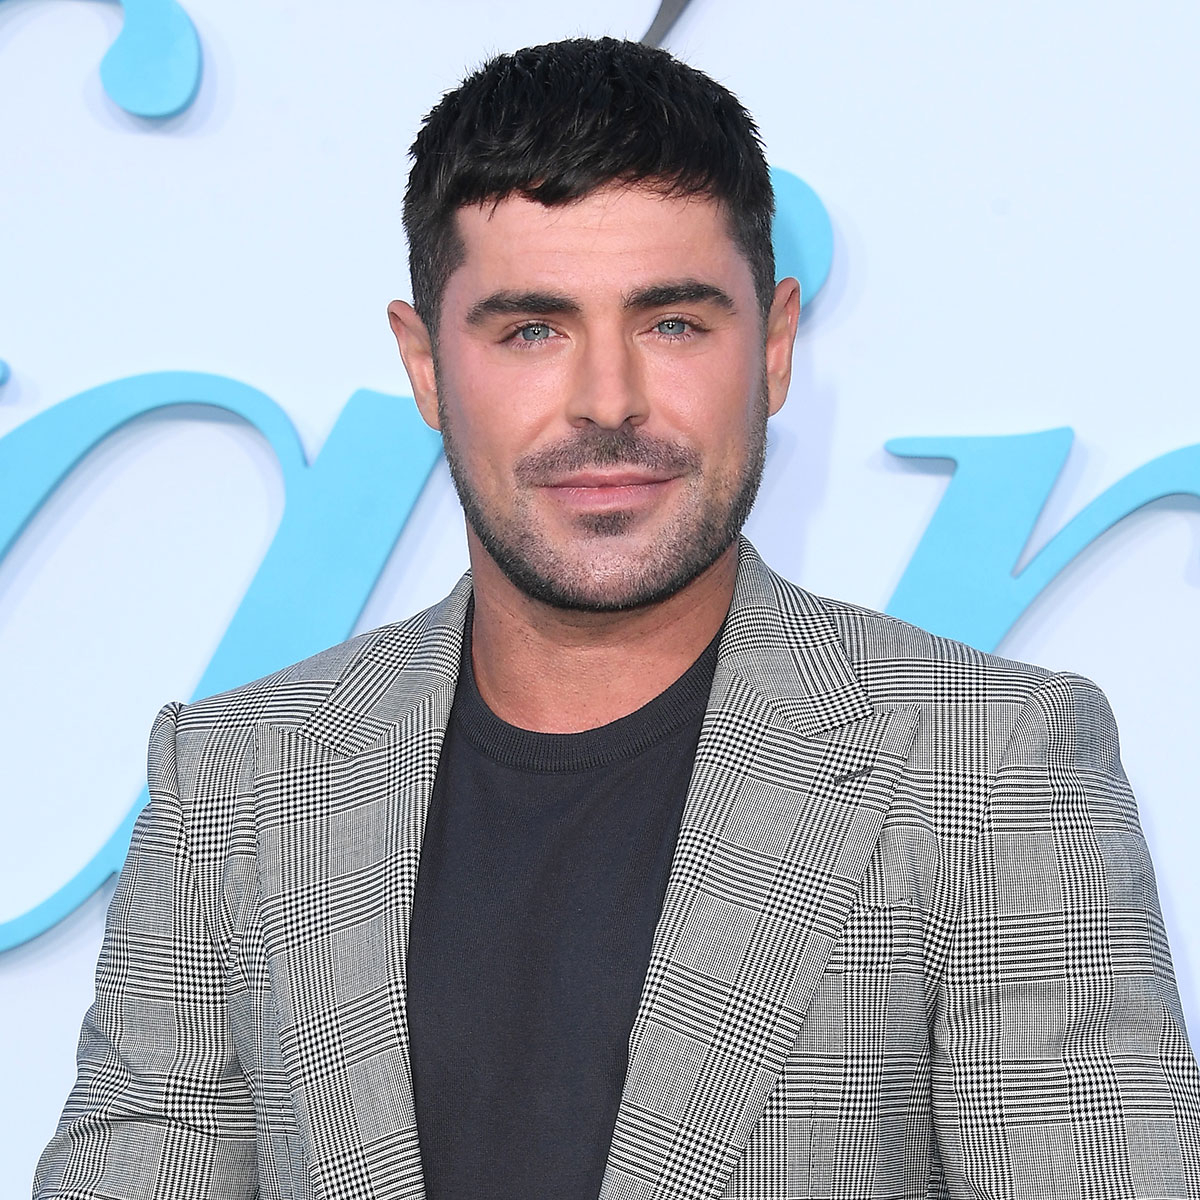 Zac Efron Hospitalized After Swimming Pool Incident in Ibiza